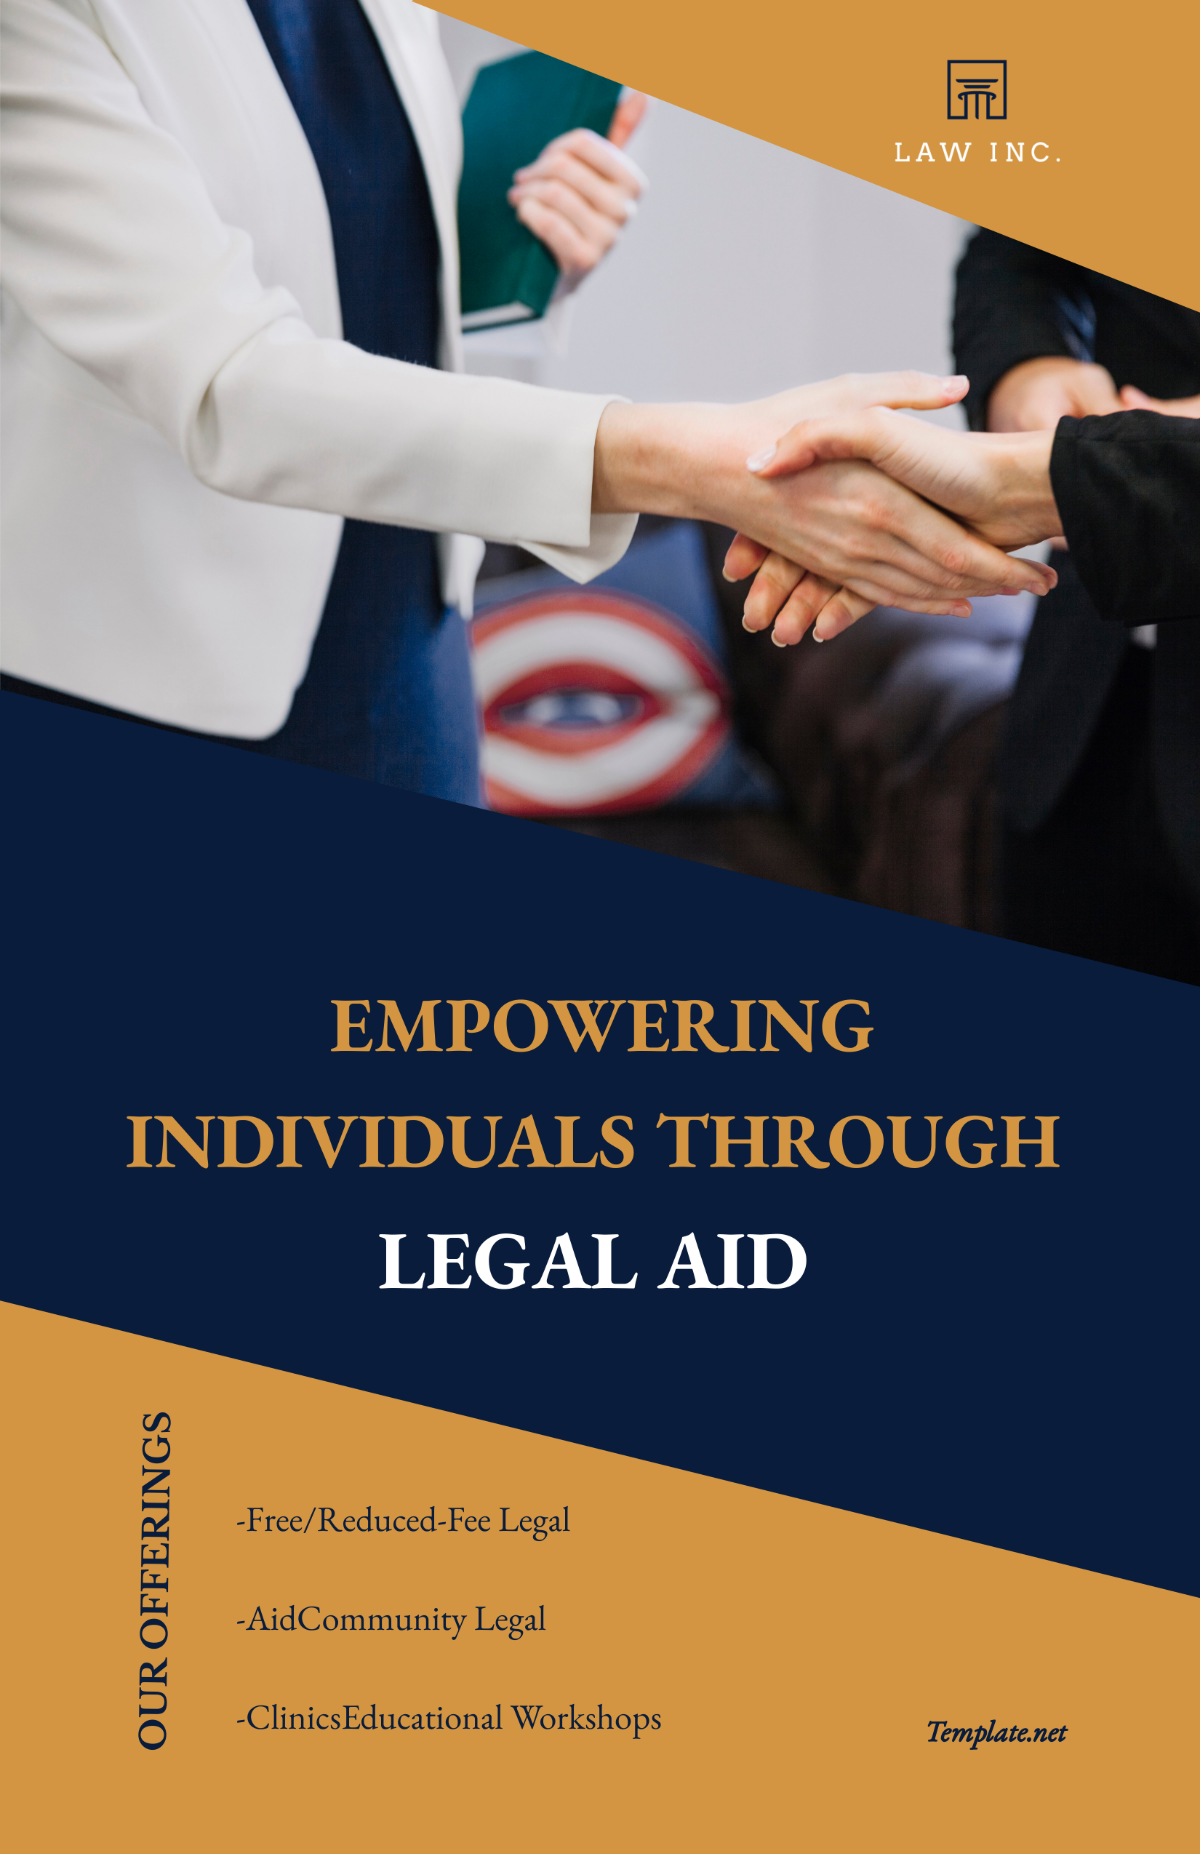 Law Firm Legal Aid Poster Template